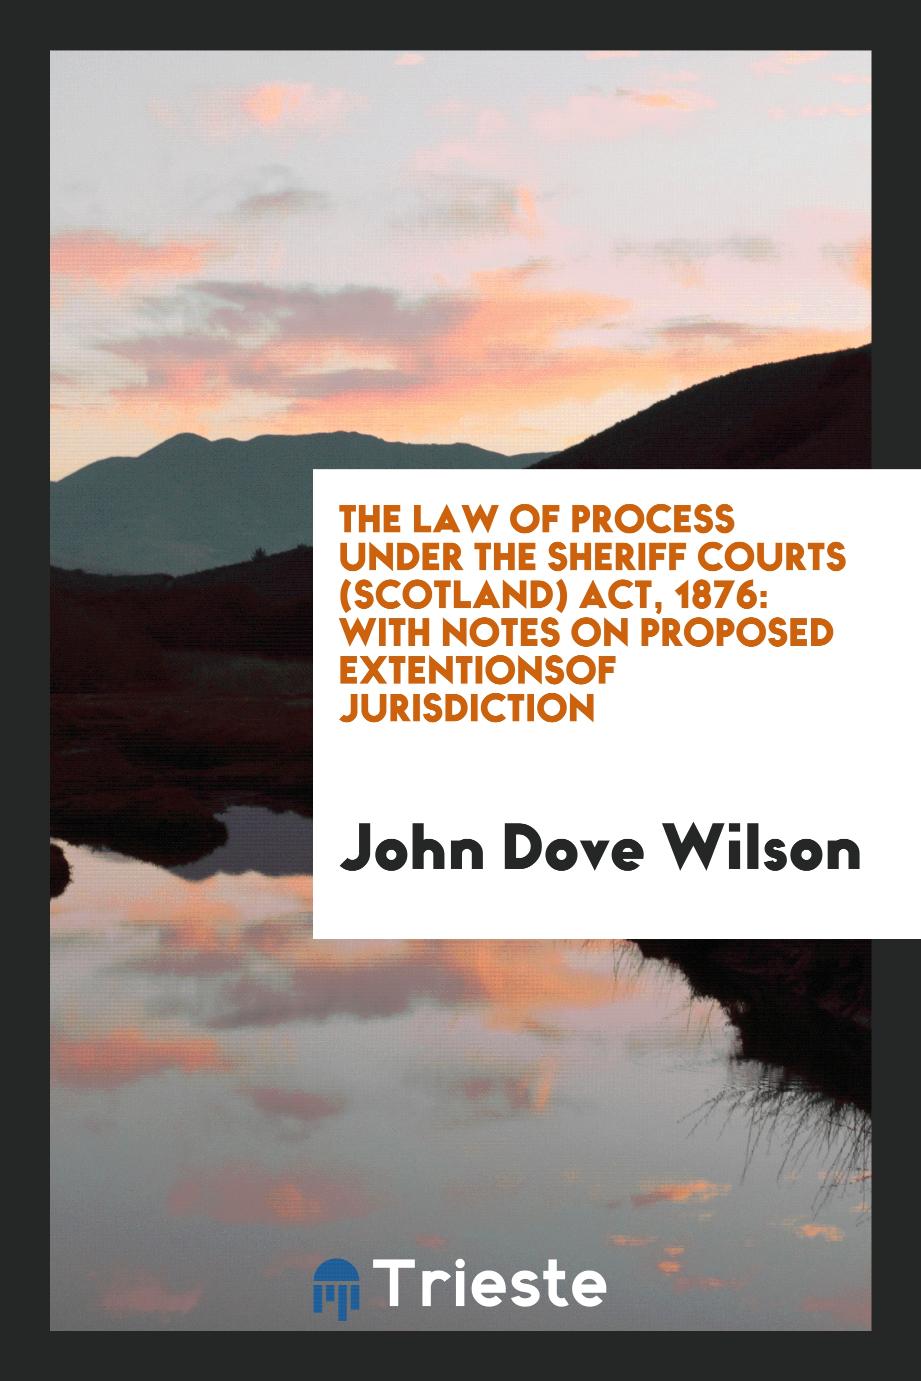 The Law of Process Under the Sheriff Courts (Scotland) Act, 1876: With Notes on Proposed Extentionsof Jurisdiction